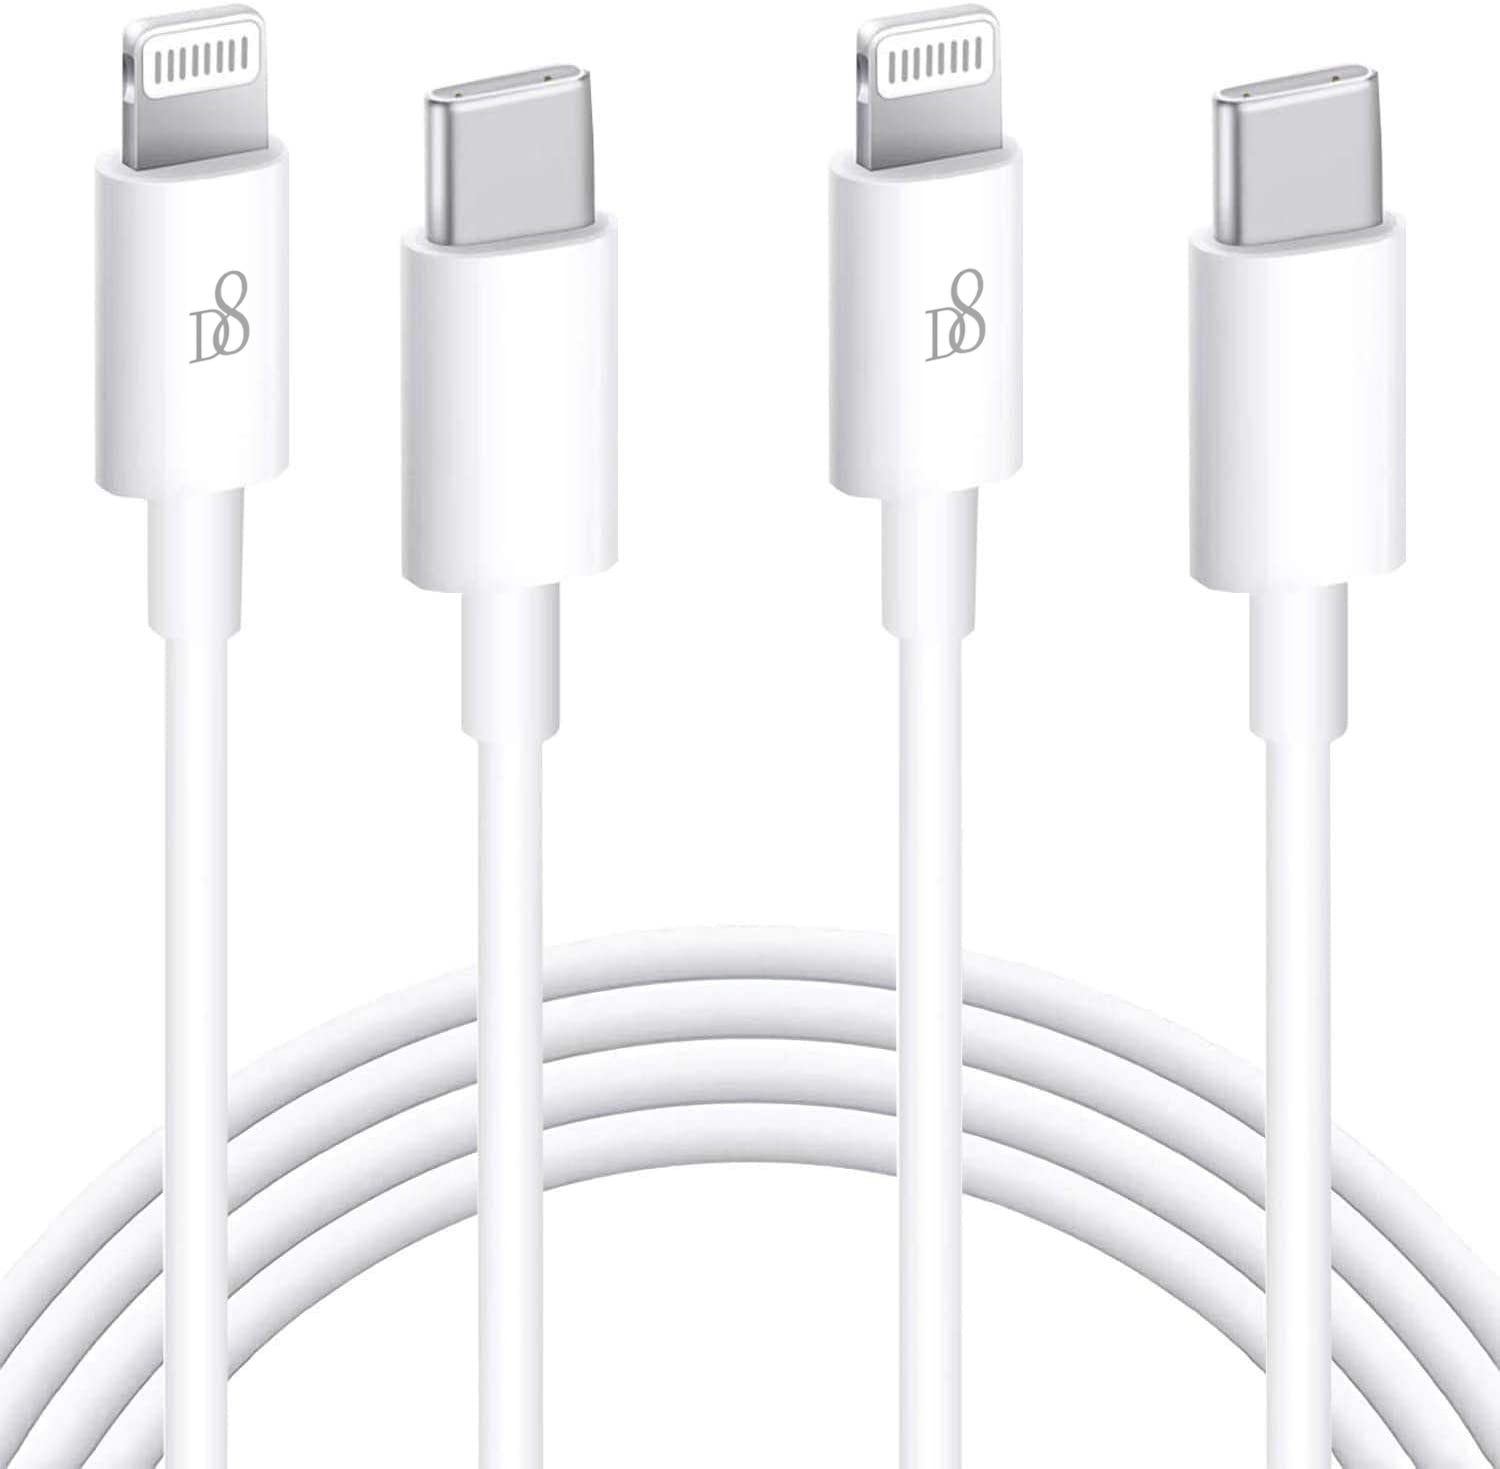 CABLE USB C - USB TYPE C 1,2M 3000mA Charge rapide - NewCo France